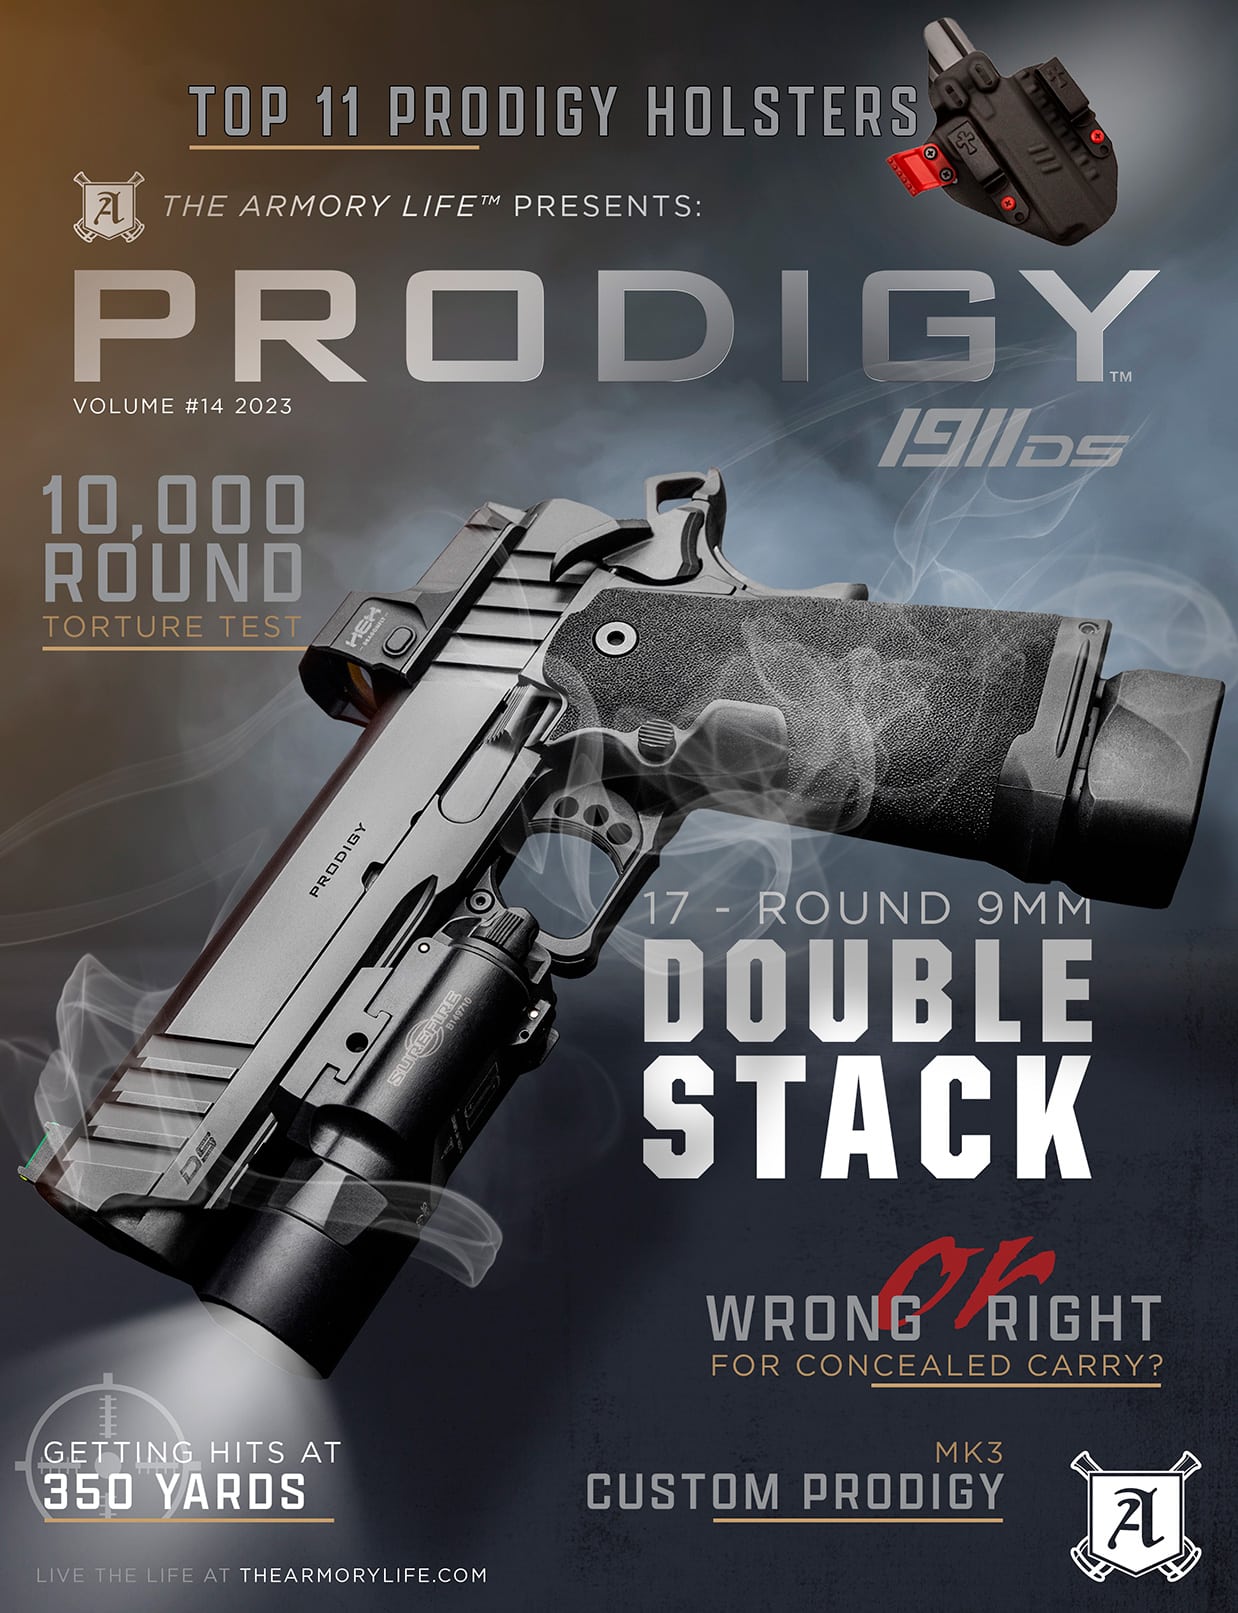 Cover for The Armory Life Digital Magazine Volume 14: 1911 DS Prodigy